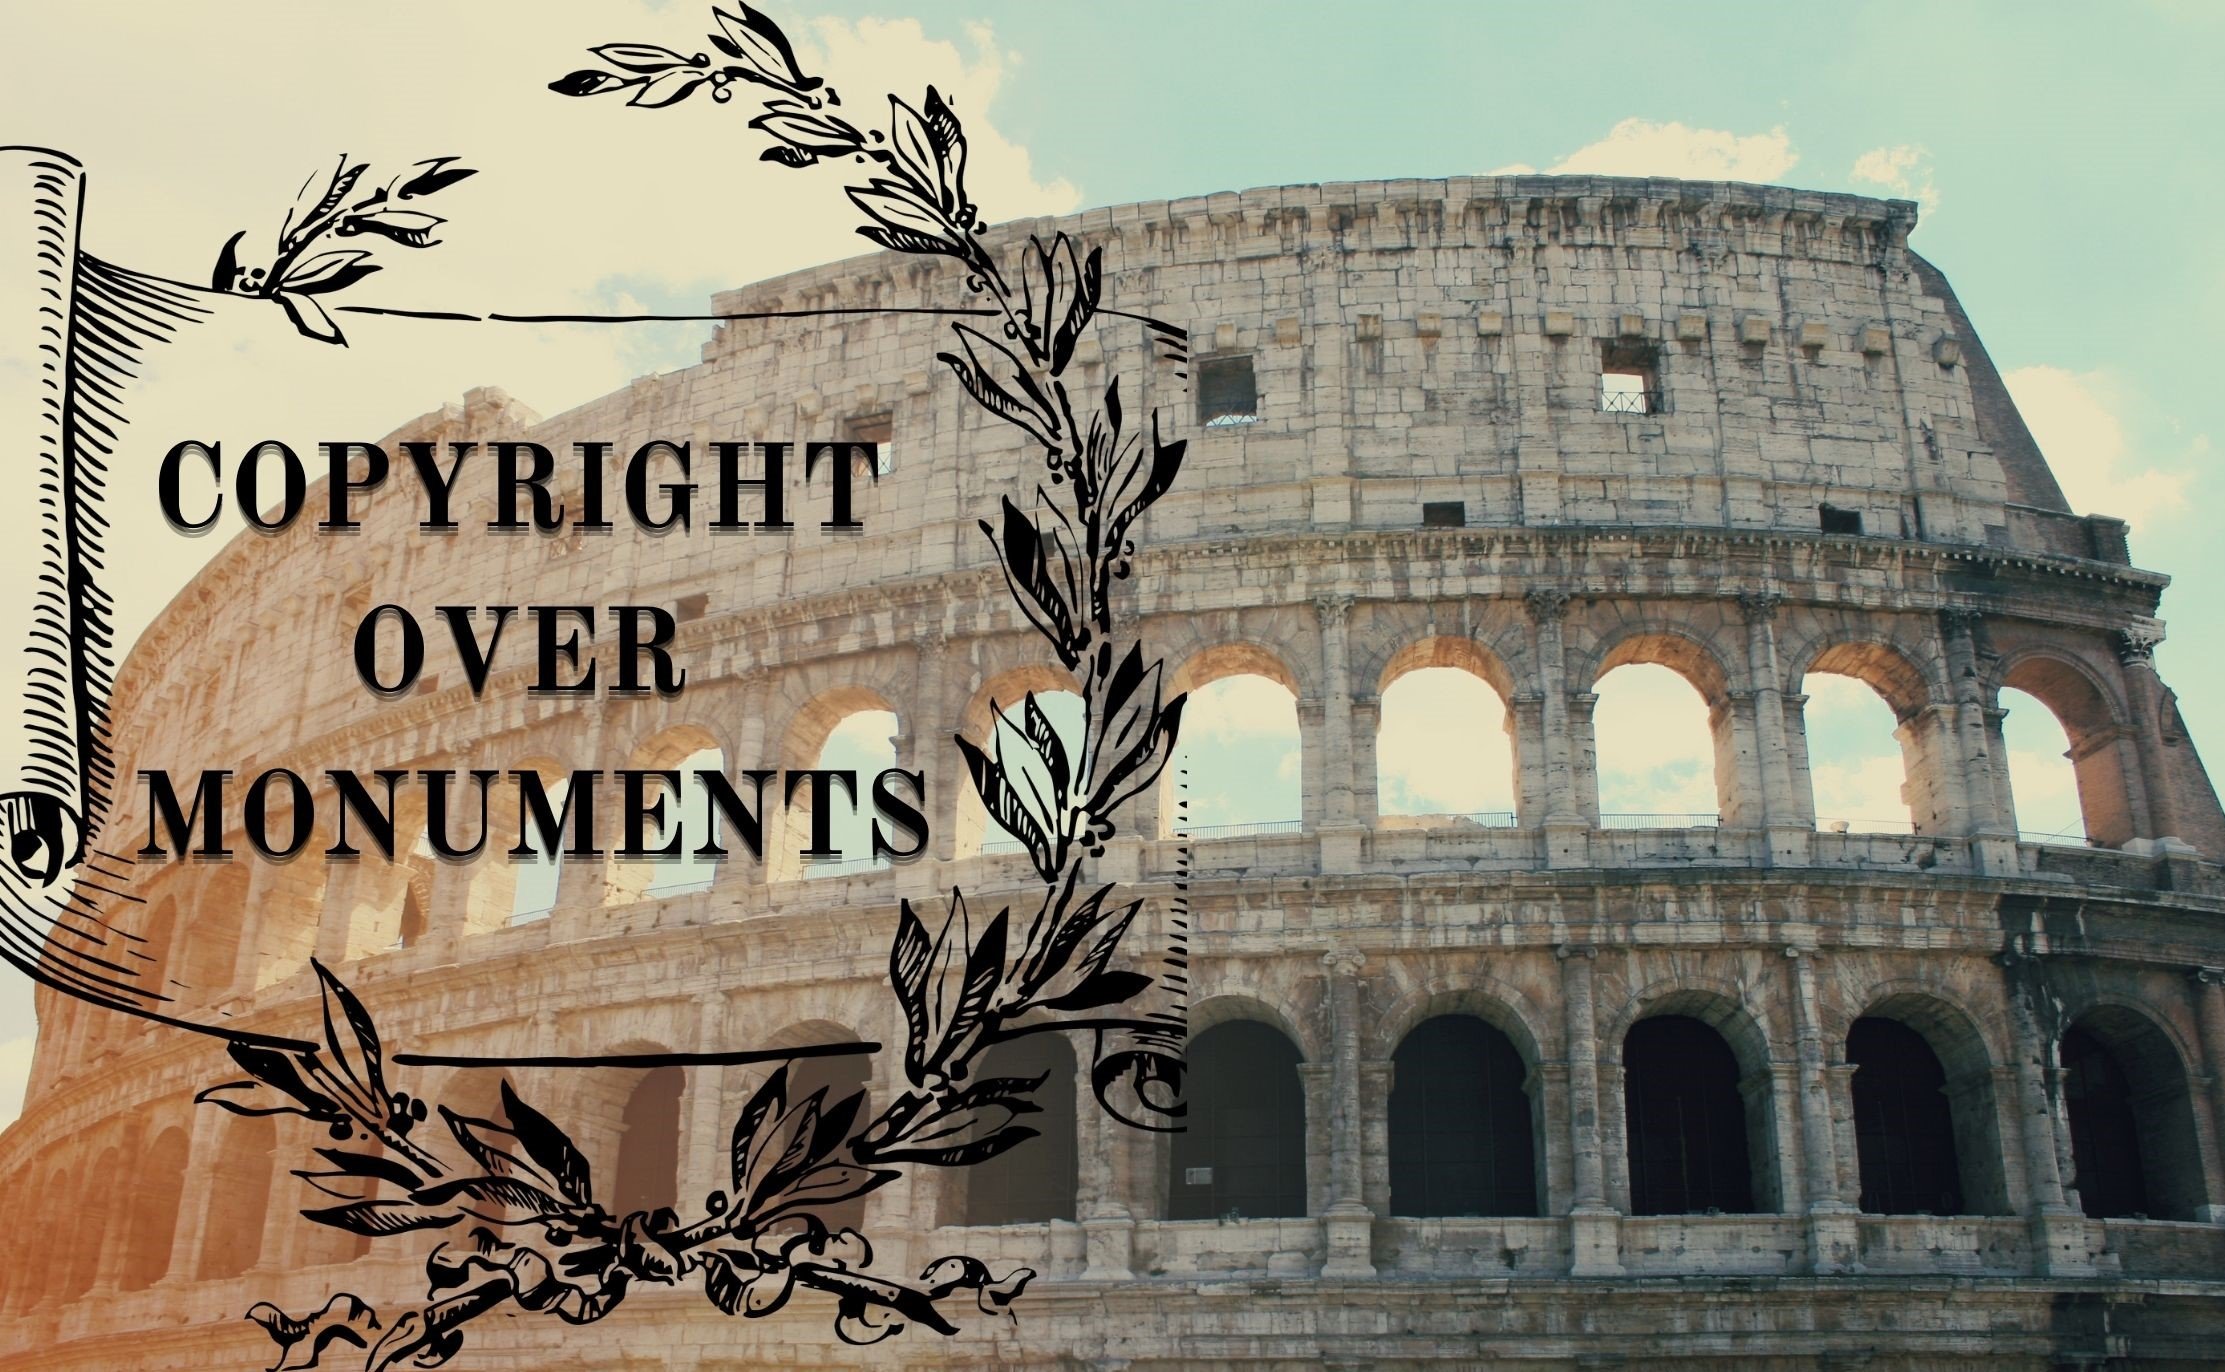 COPYRIGHT OVER MONUMENTS